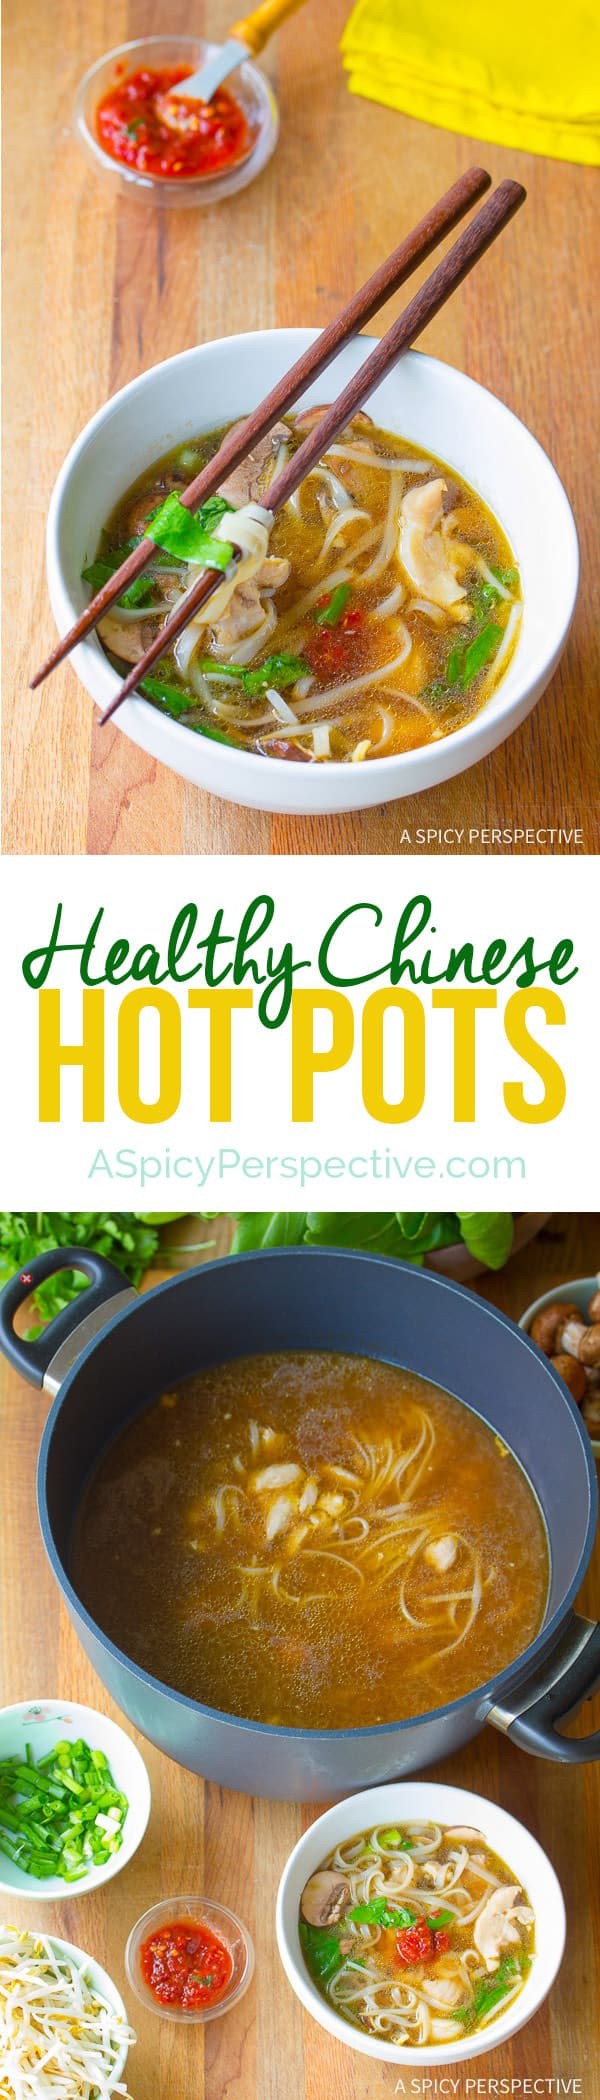 Chinese Hot Pot Recipes
 Chinese Hot Pot Recipe A Spicy Perspective